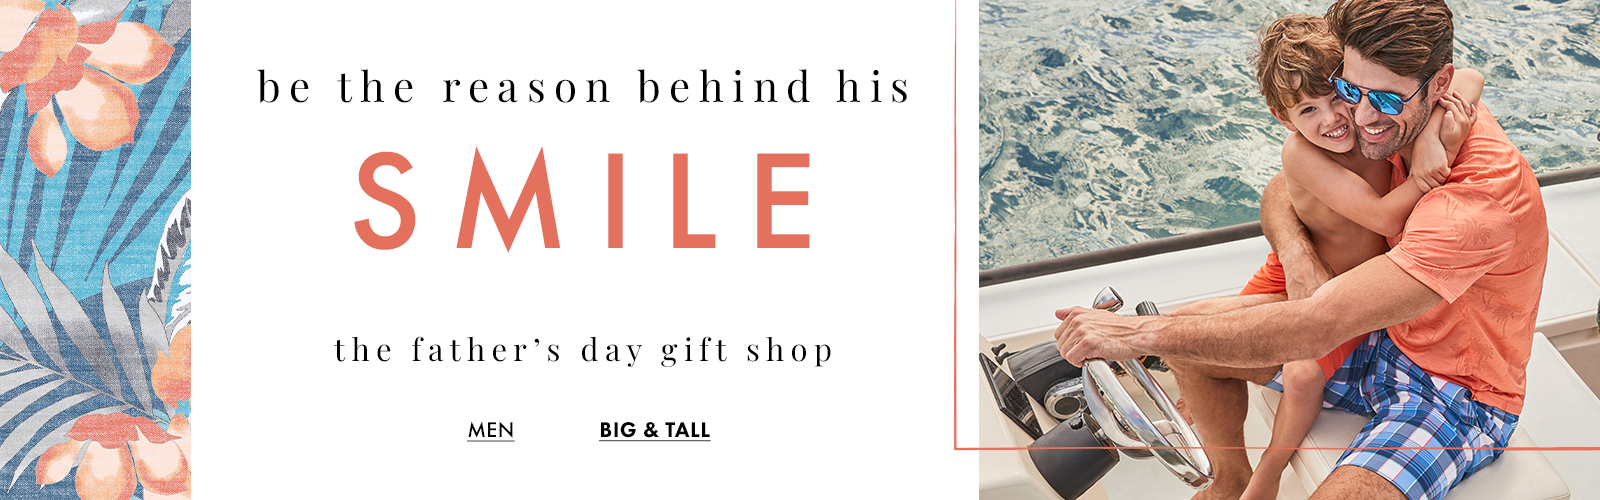 Be The Reason Behind His Smile - Father's Day Gift Shop Big & Tall